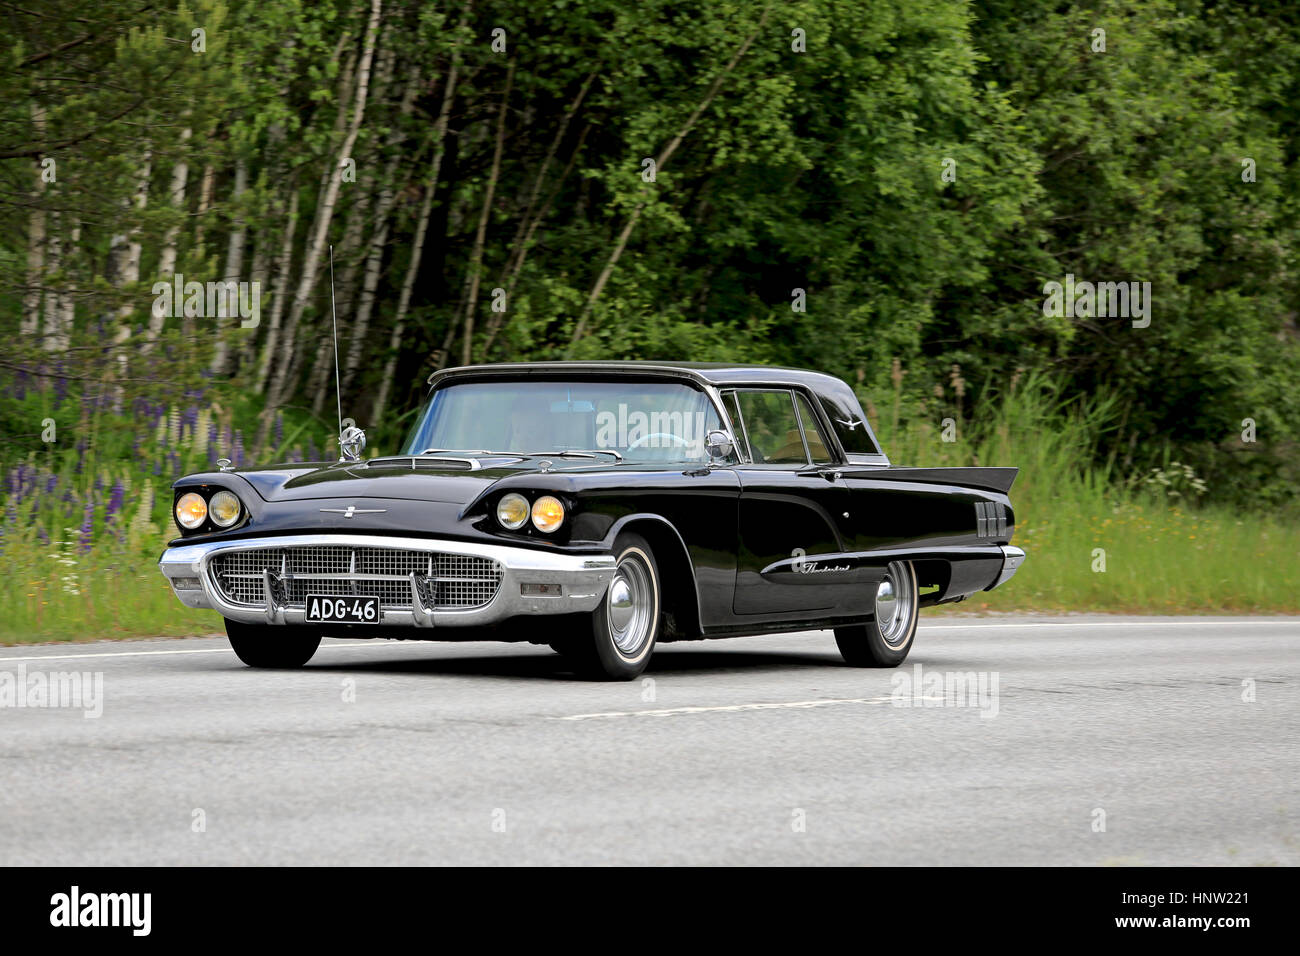 KARJAA, FINLAND - JUNE 5, 2016: Classic black Ford Thunderbird car, probably year 1960, moves along highway in the summer. Stock Photo